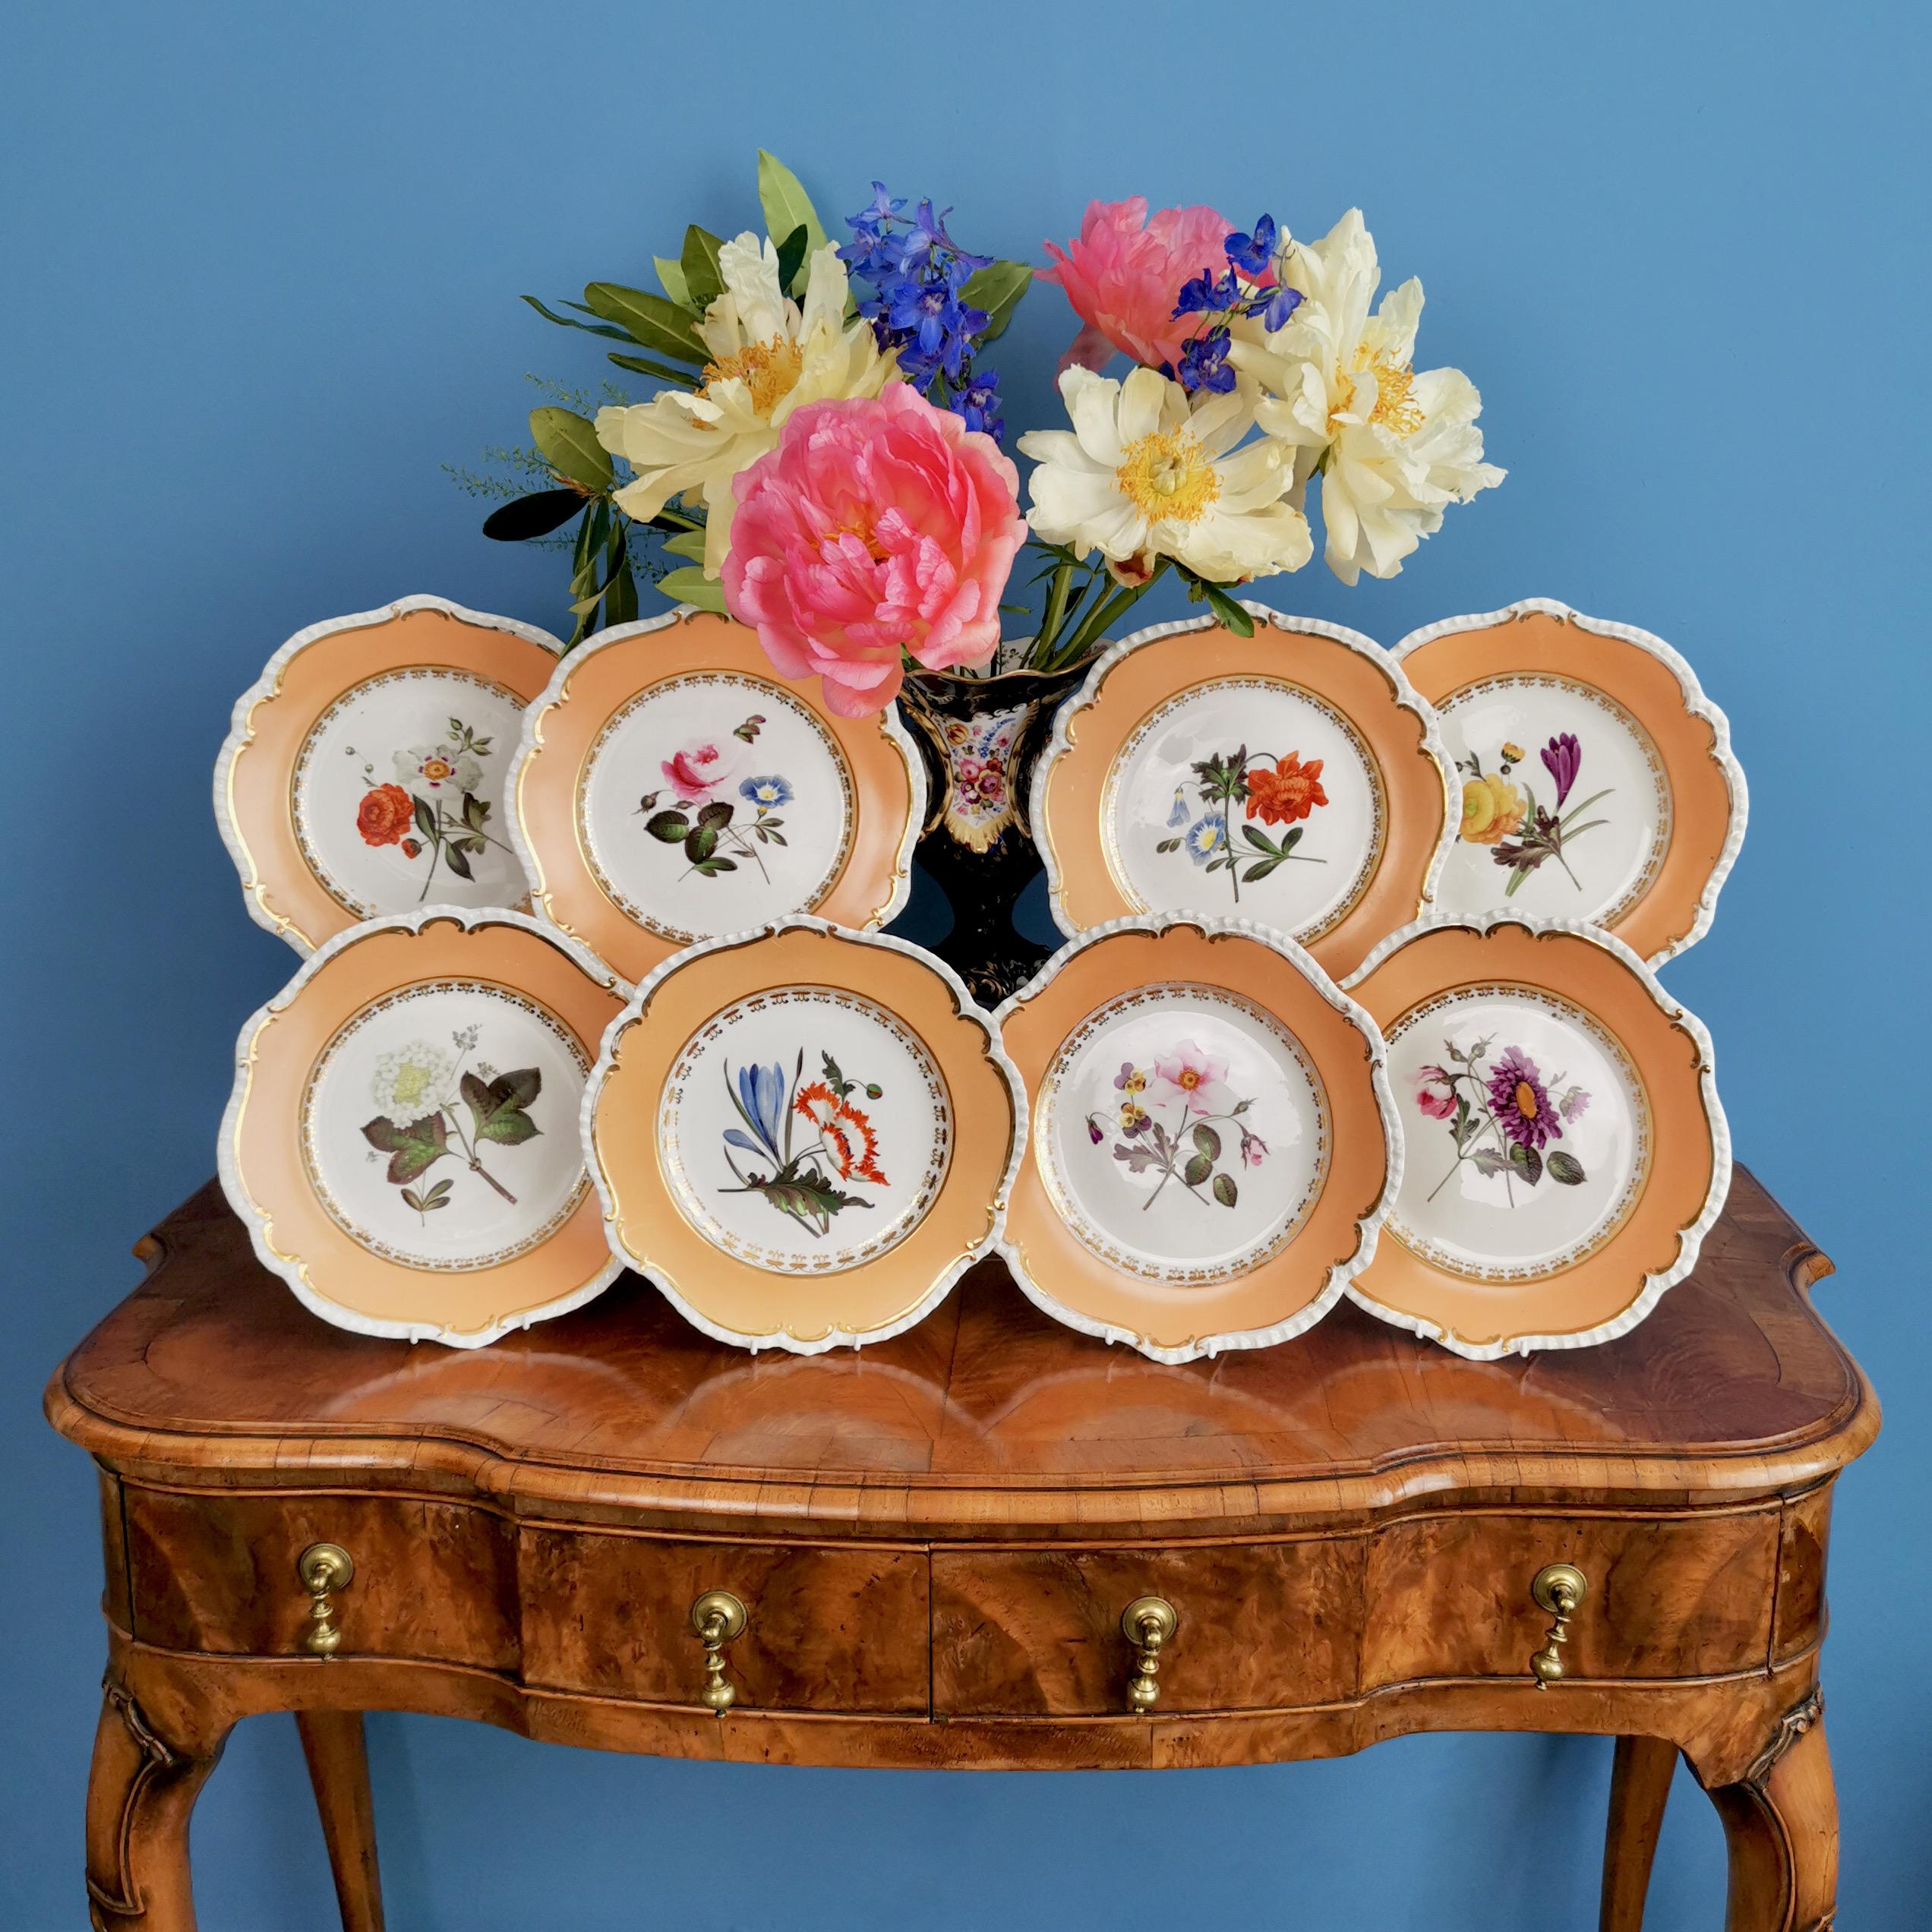 On offer is a rare set of eight dessert plates made by Coalport between 1820 and 1825. The plates are decorated in a peach ground with stunning flower paintings attributed to Cecil Jones.
 
Coalport was one of the leading potters in 19th and 20th